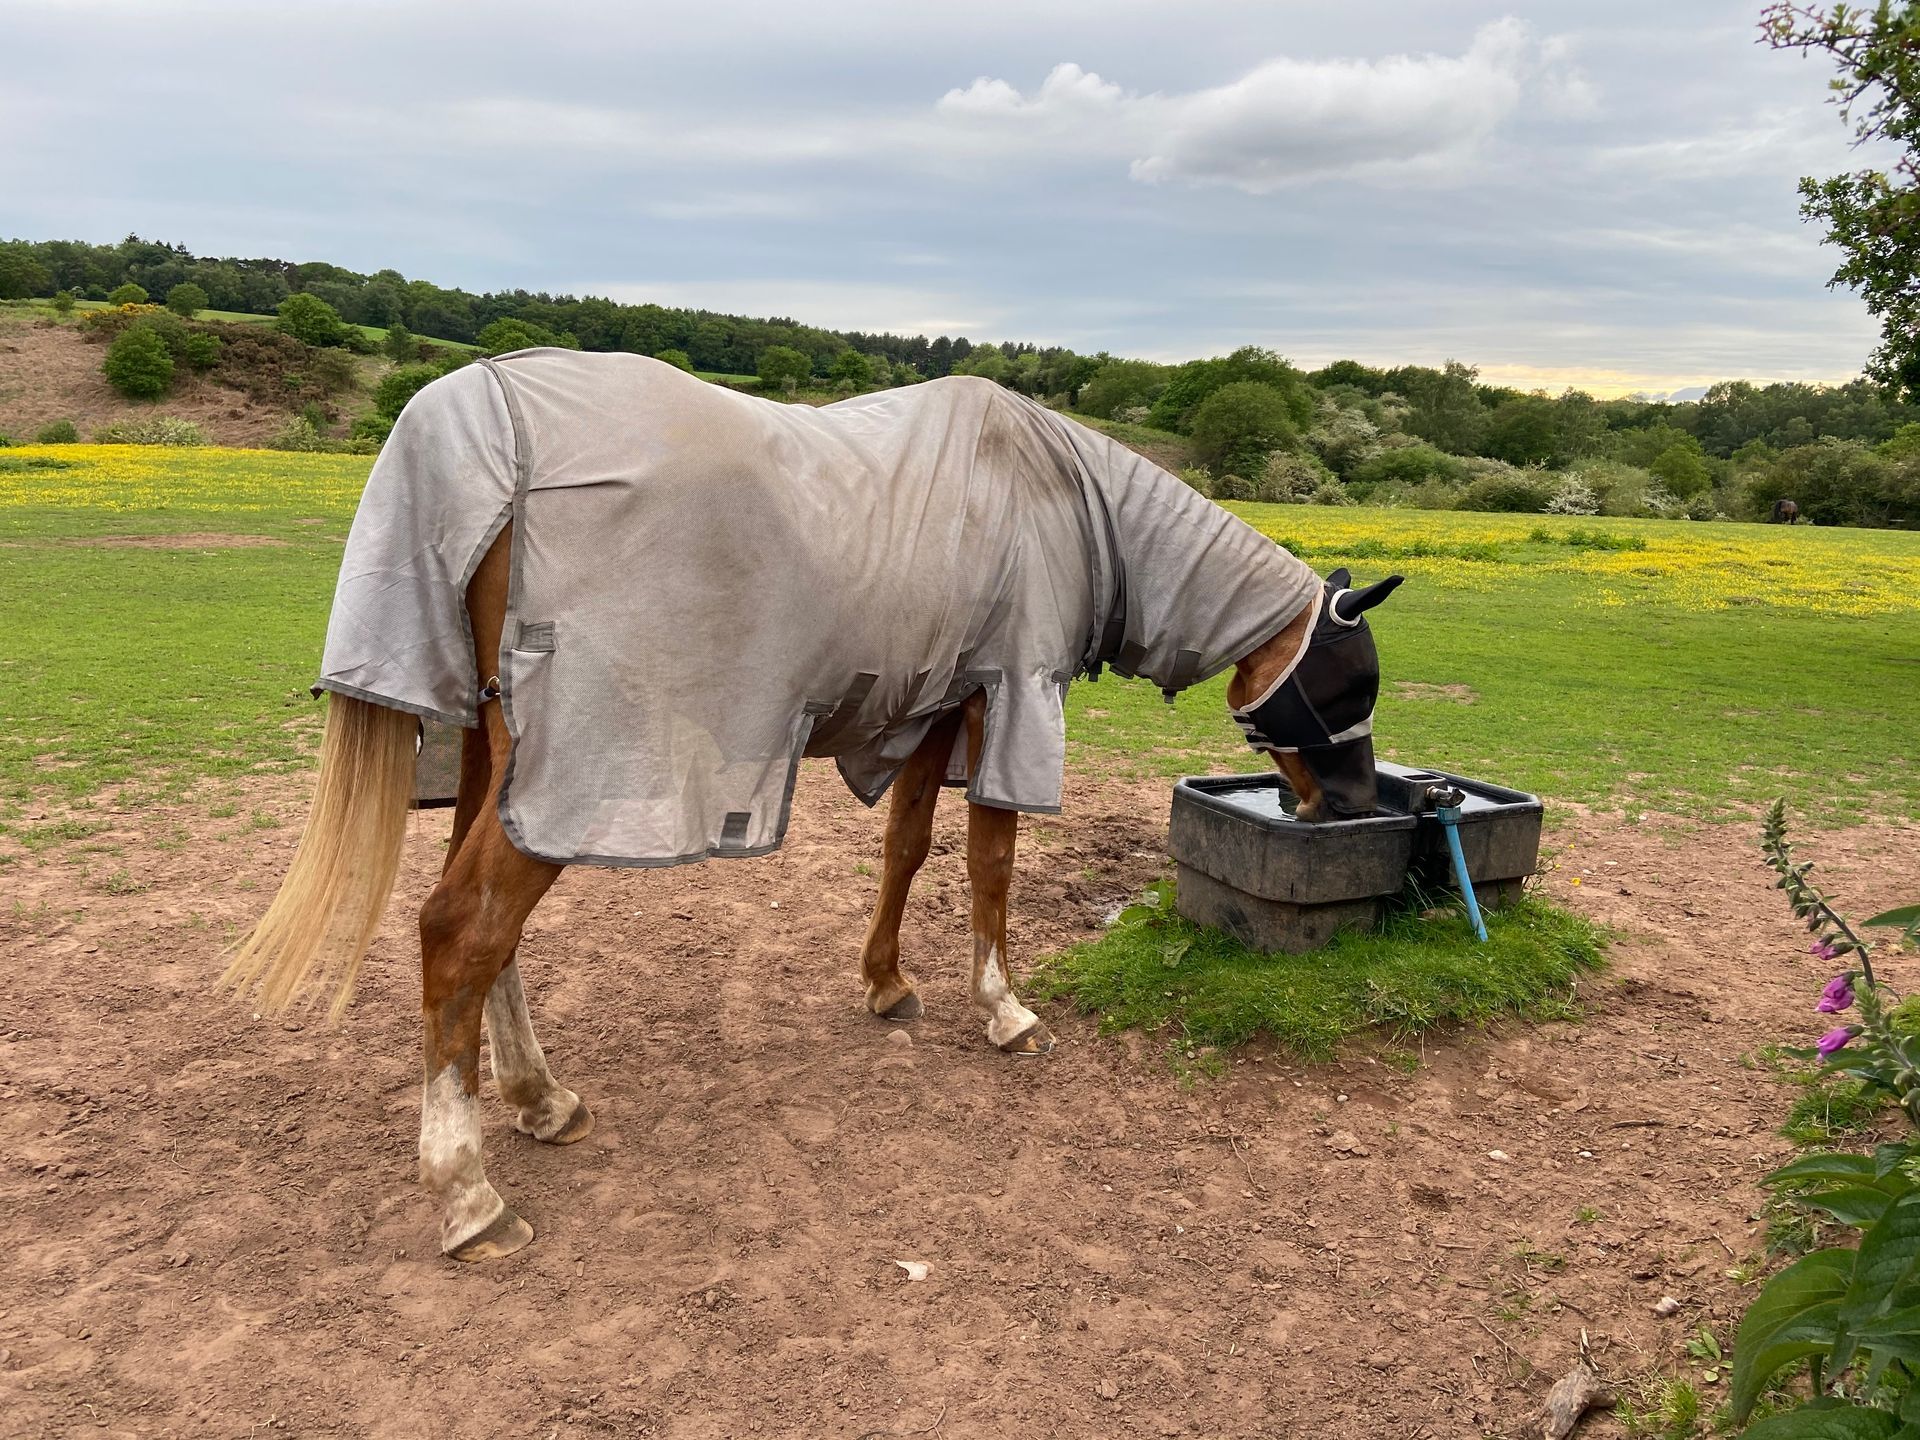 Chestnut horse in field with horse coat on, drinking water from trough, looked after by Al's Creatures Great and Small